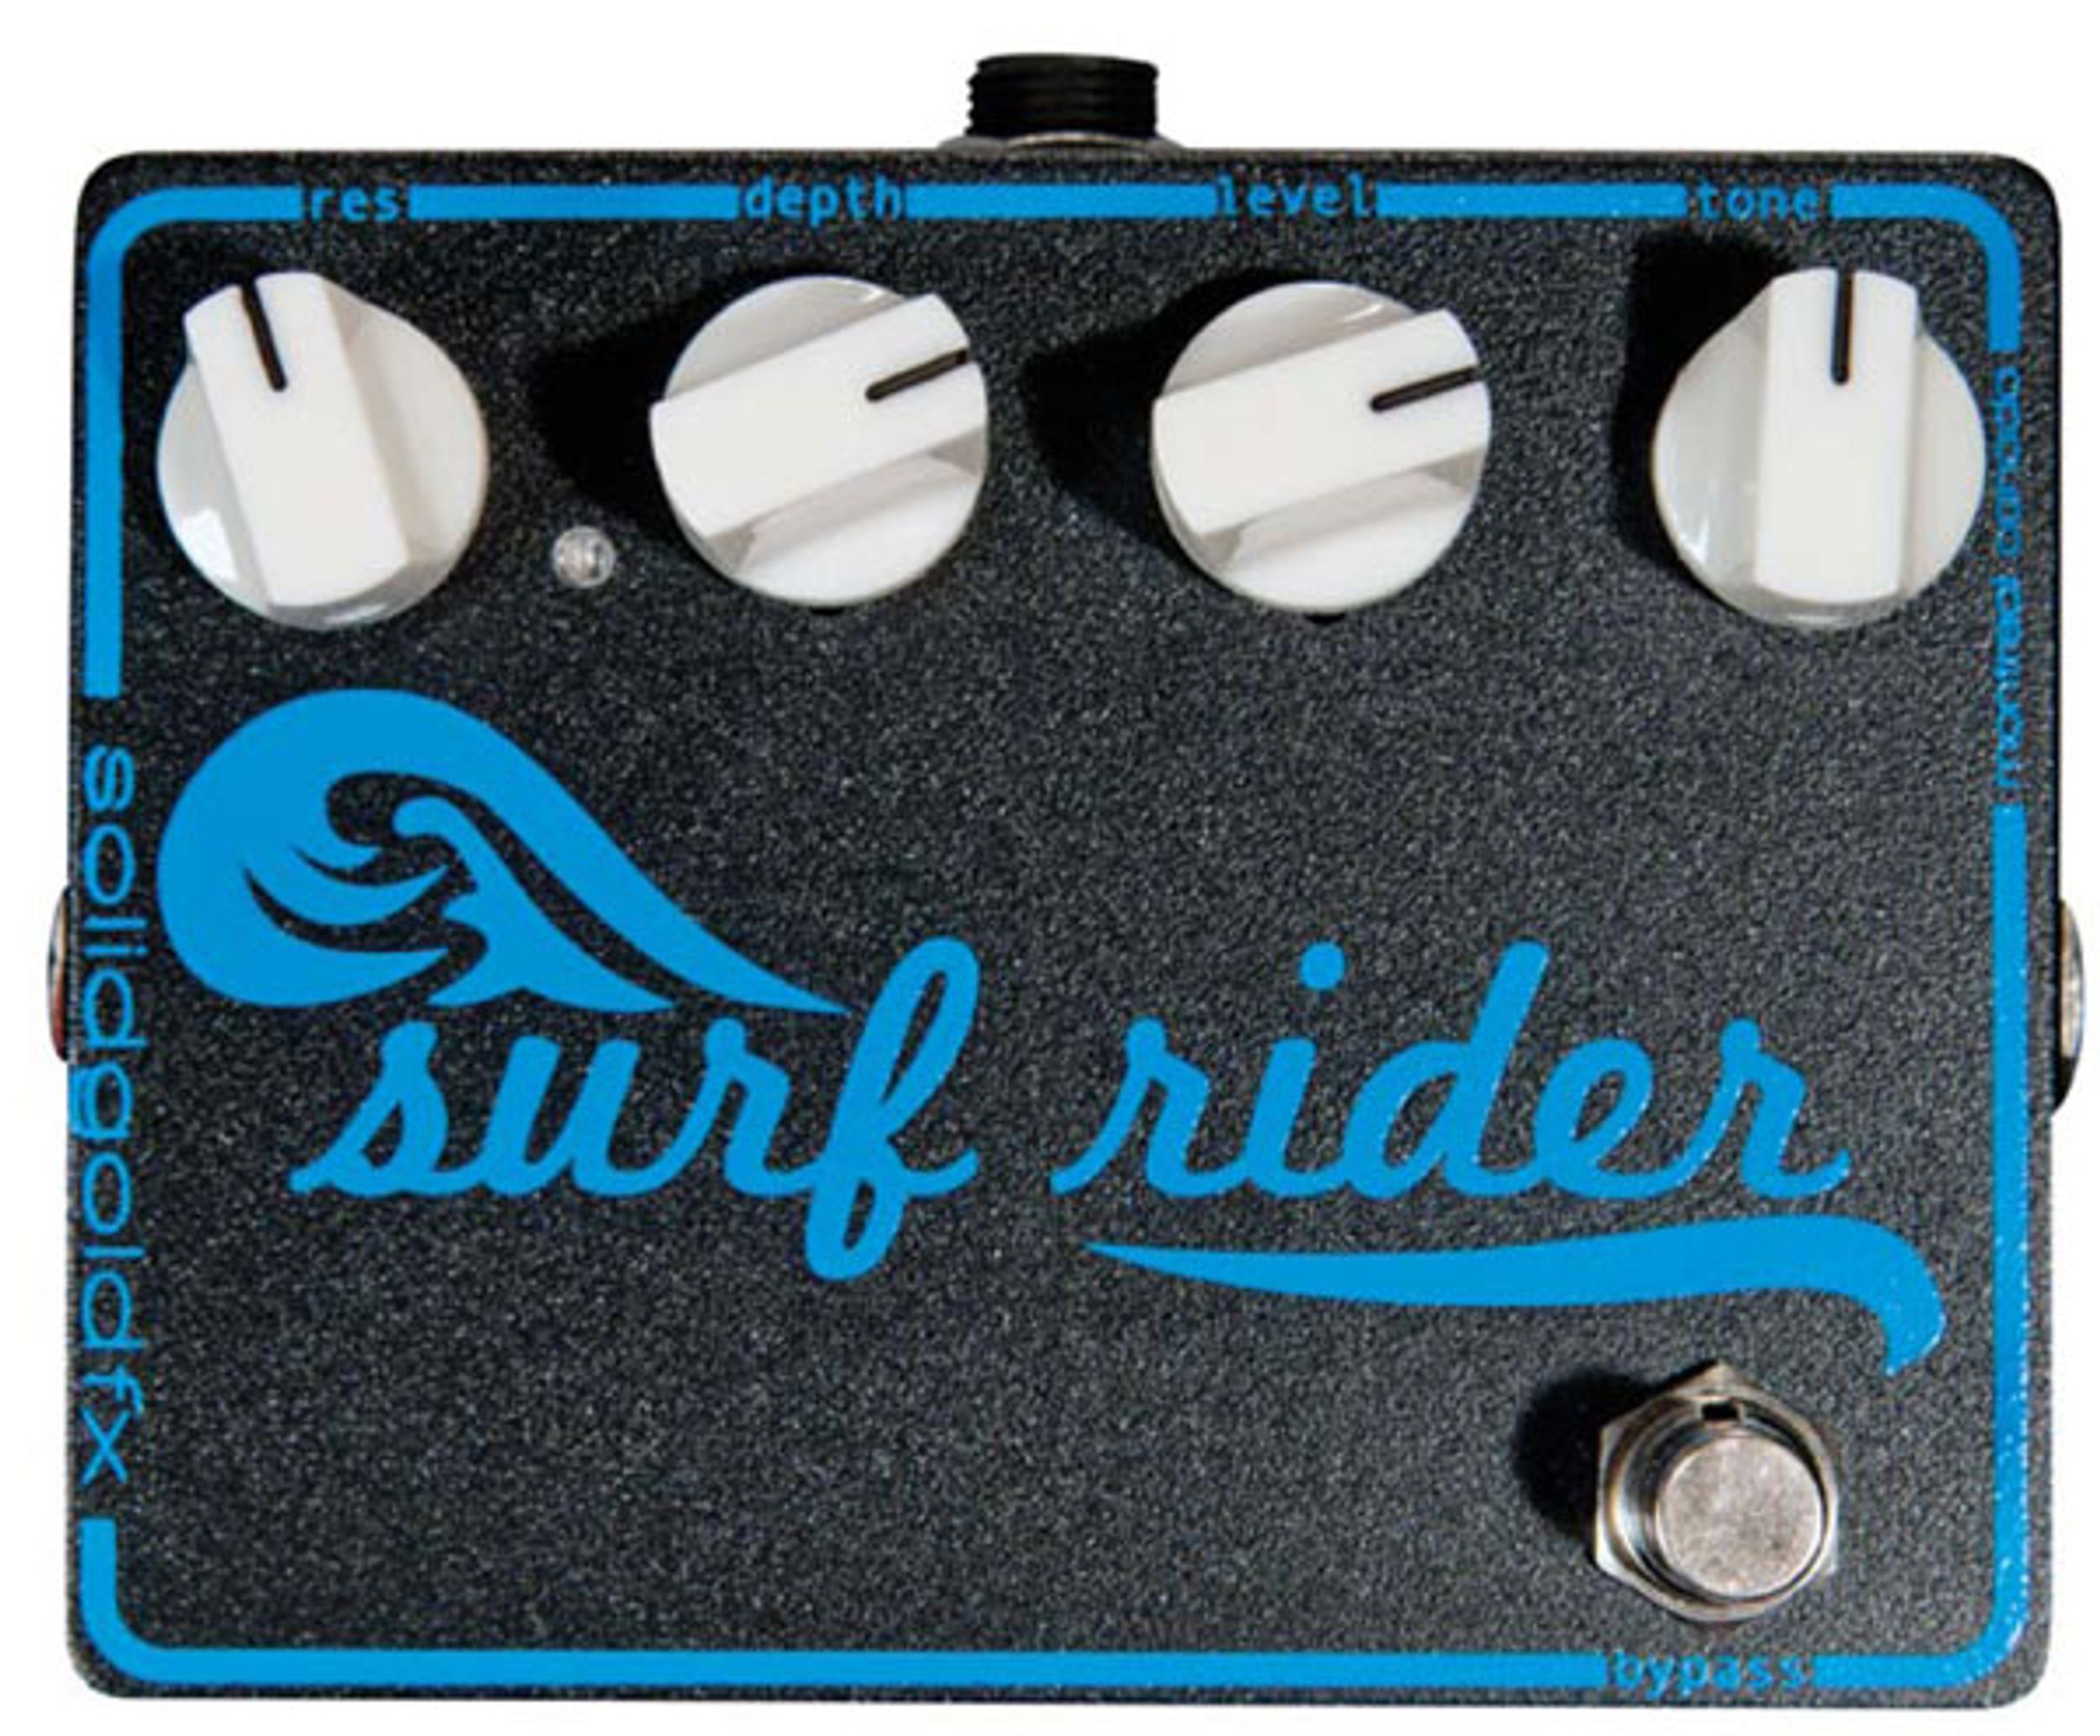 SolidGoldFX Surf Rider Pedal Review